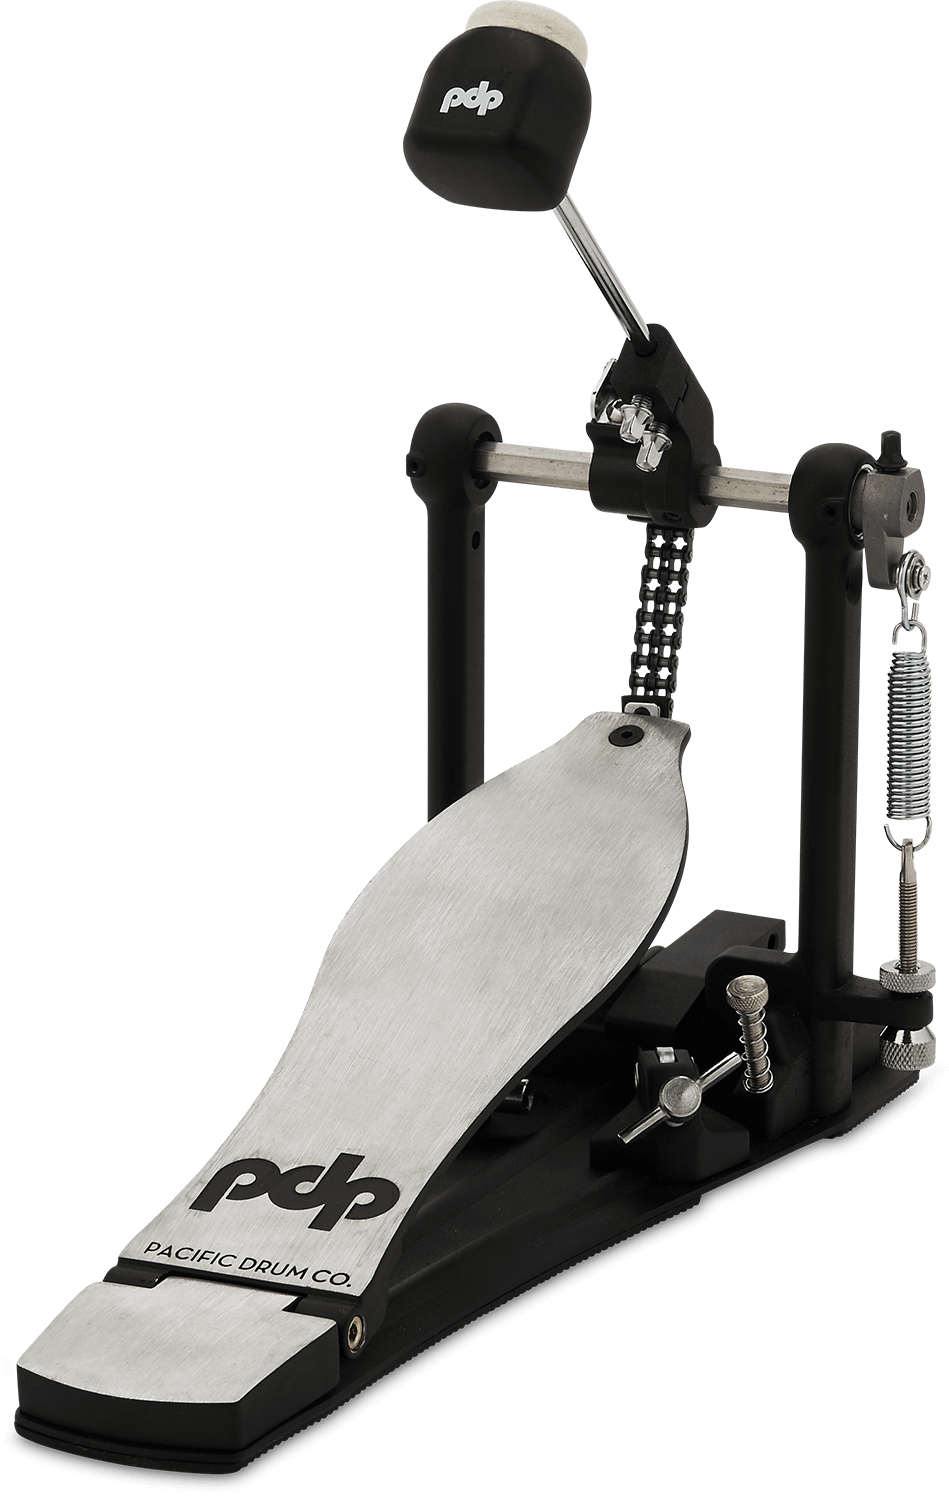 Pdp Pdsp 810 Serie 800 - Bass drum pedal - Main picture